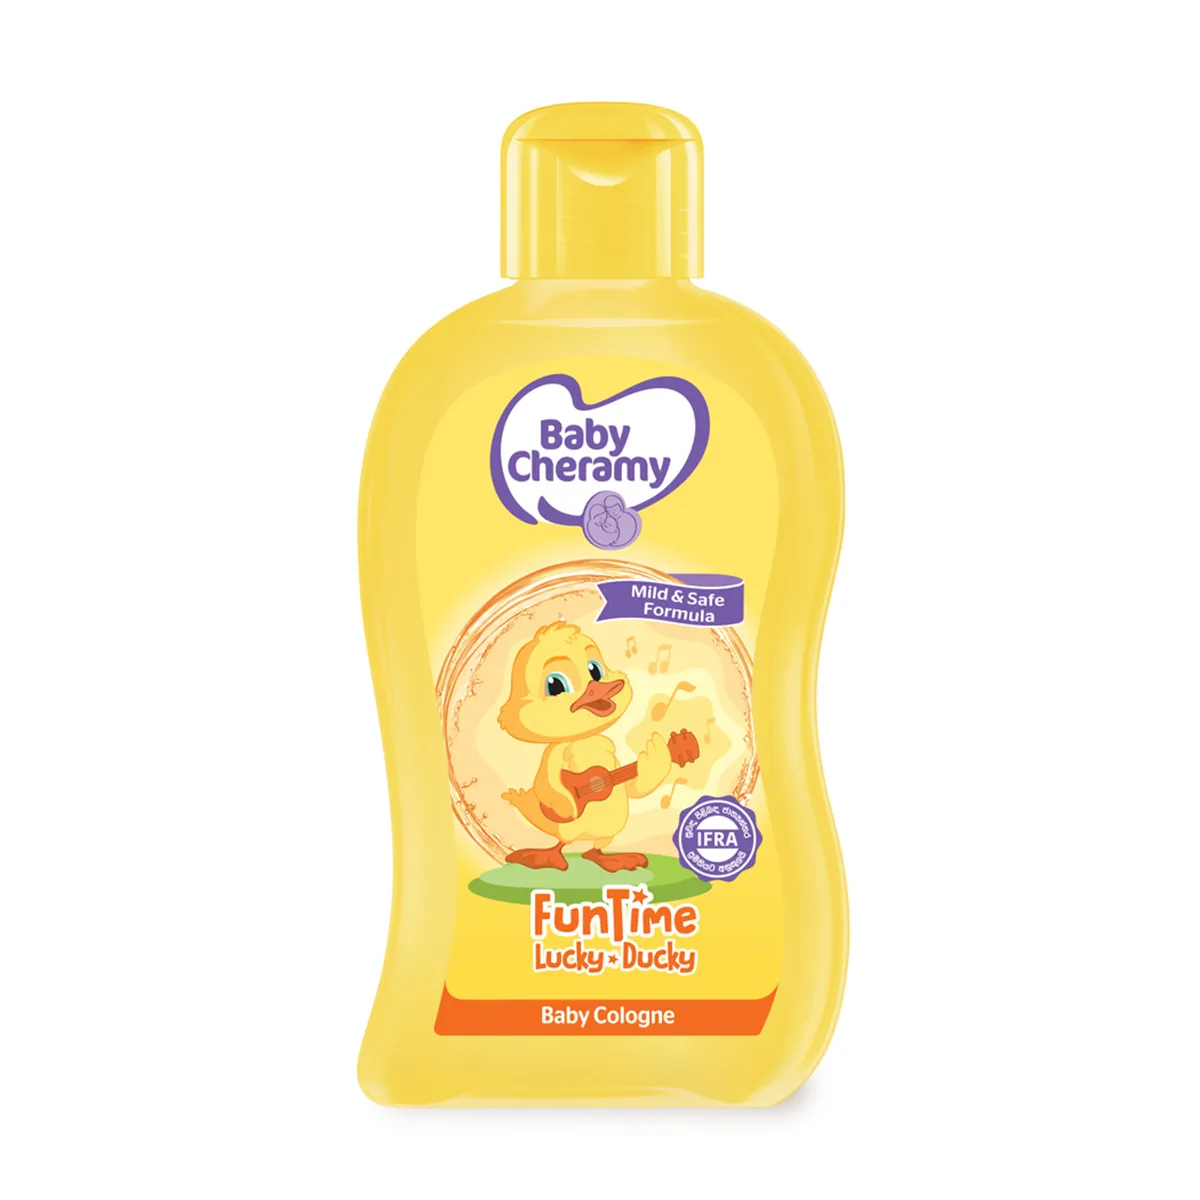 Baby Cheramy Funtime Cologne Lucky Ducky 100ml